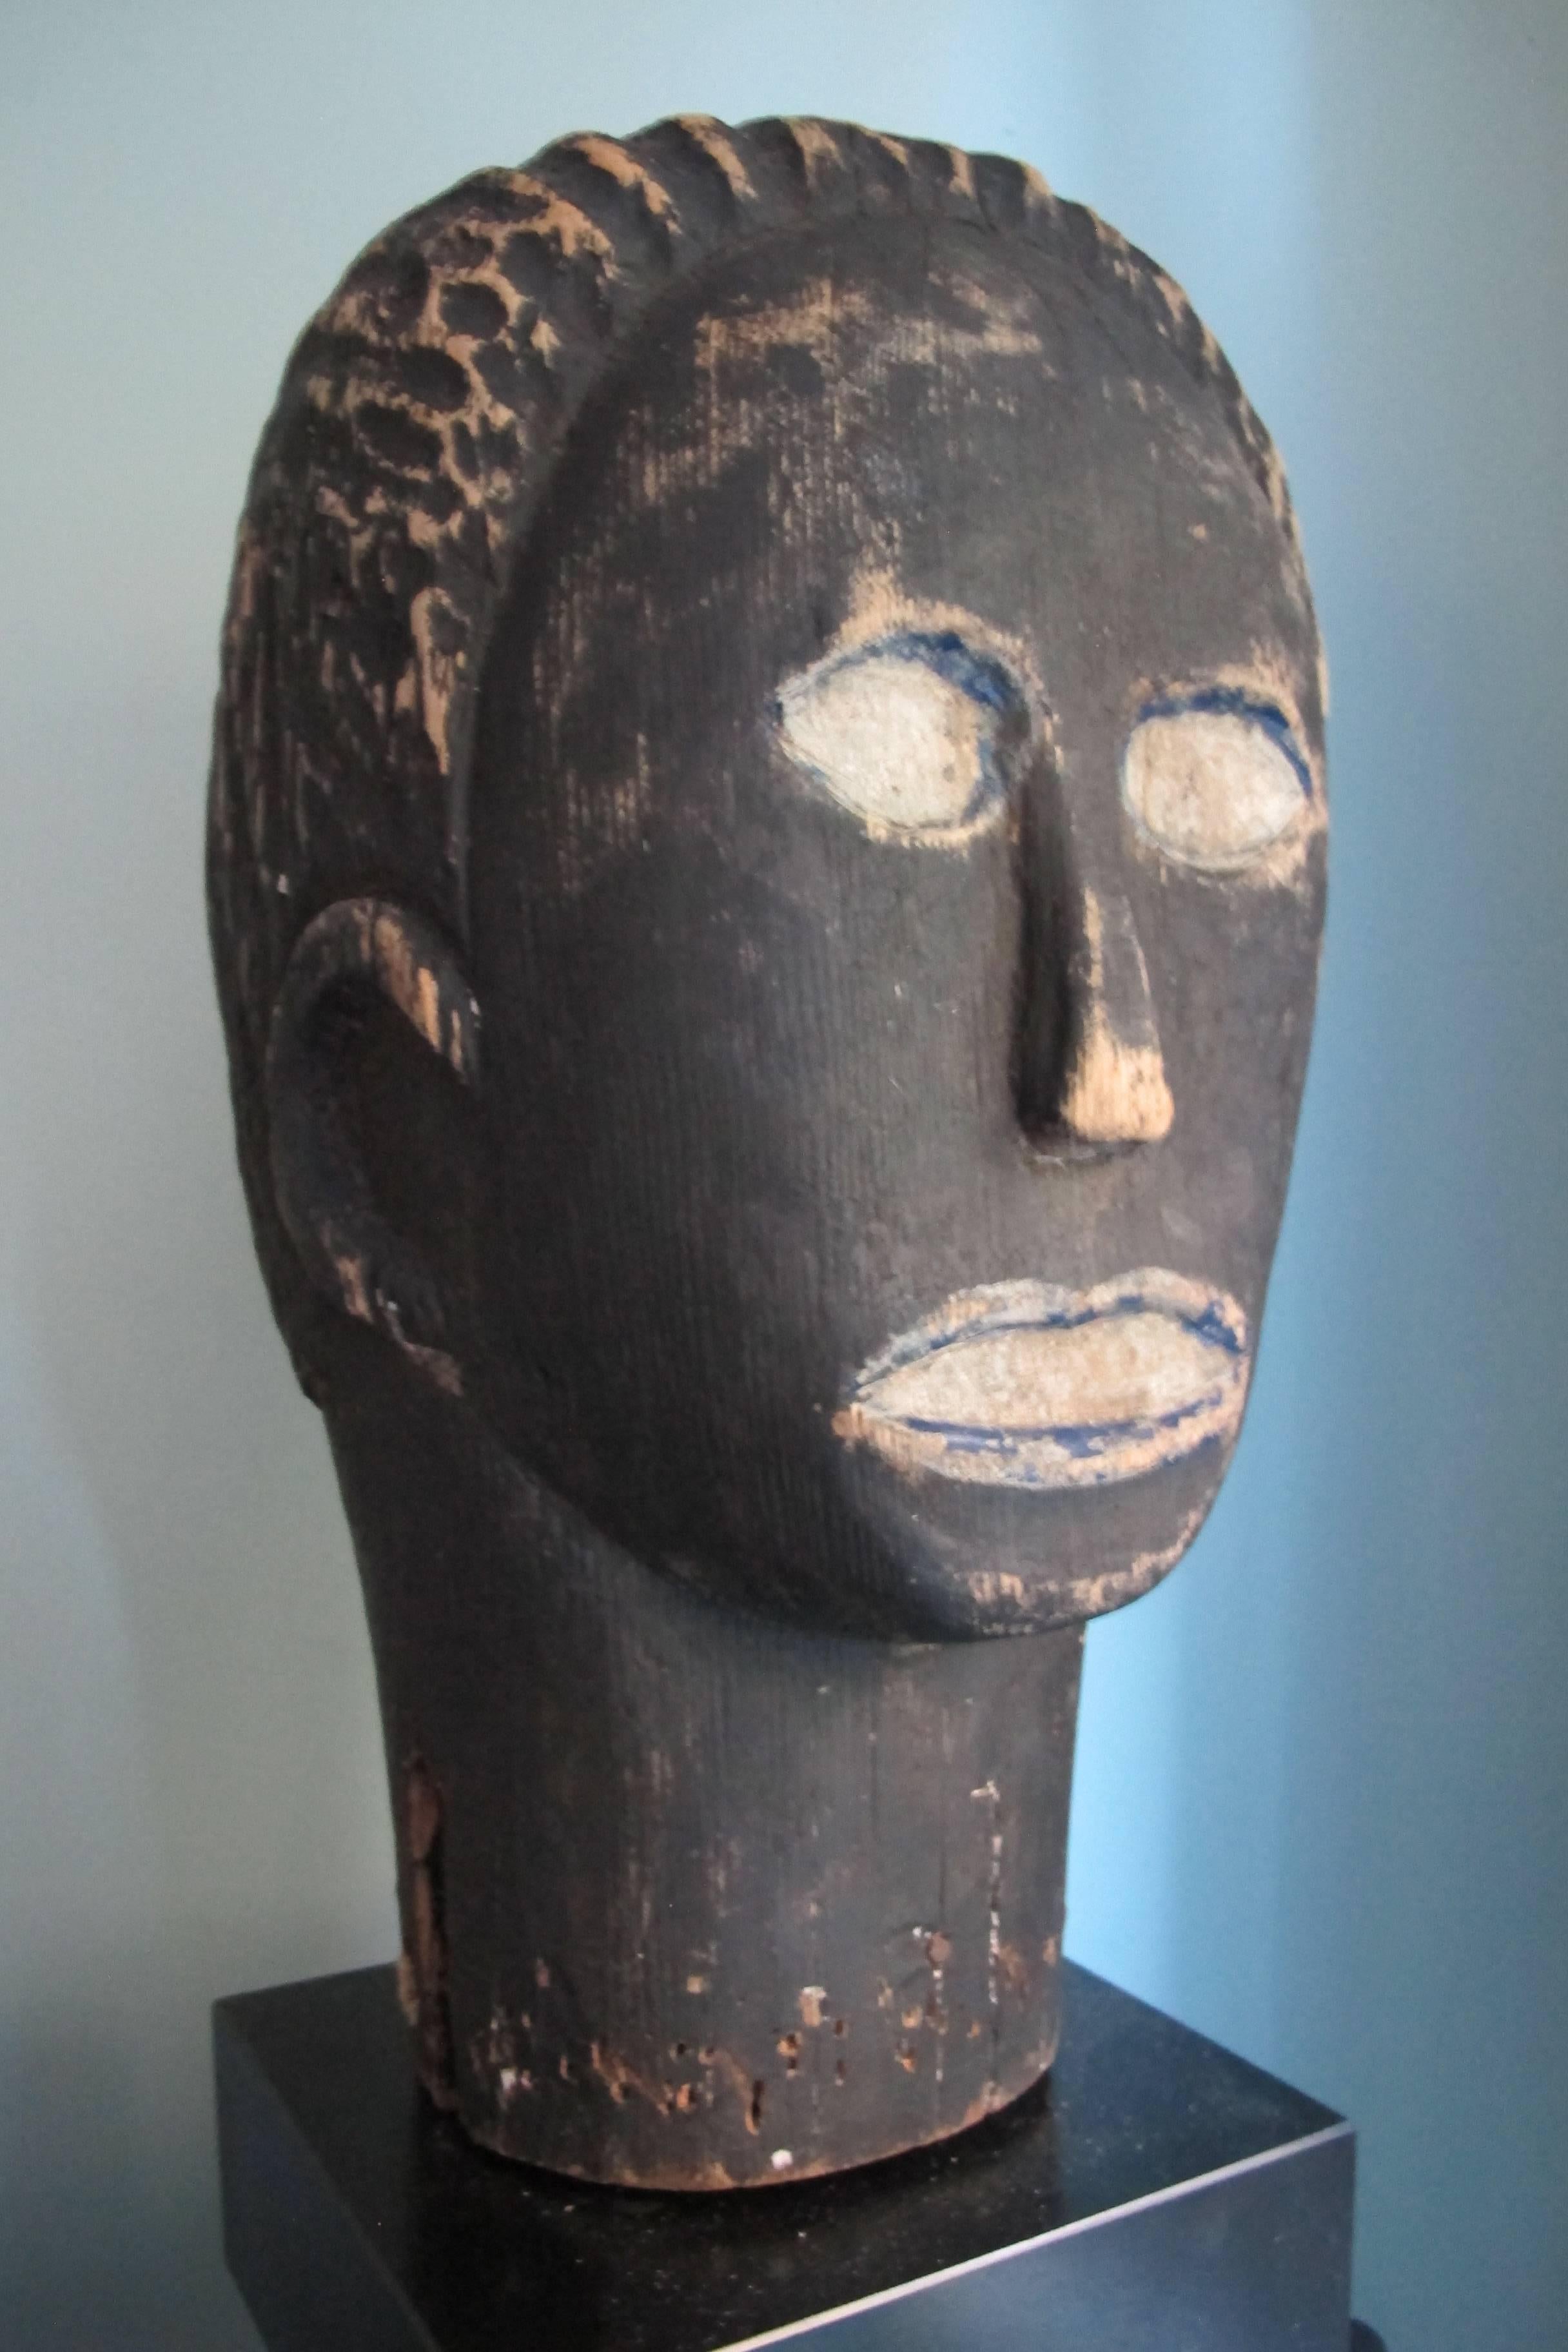 This African-American carved wood head has an unusual subtly and sensitivity from the mouth to the eyes and hair. What is most unusual is the blue paint used to outline both the eyes and the mouth. In west African areas the addition of indigo blue